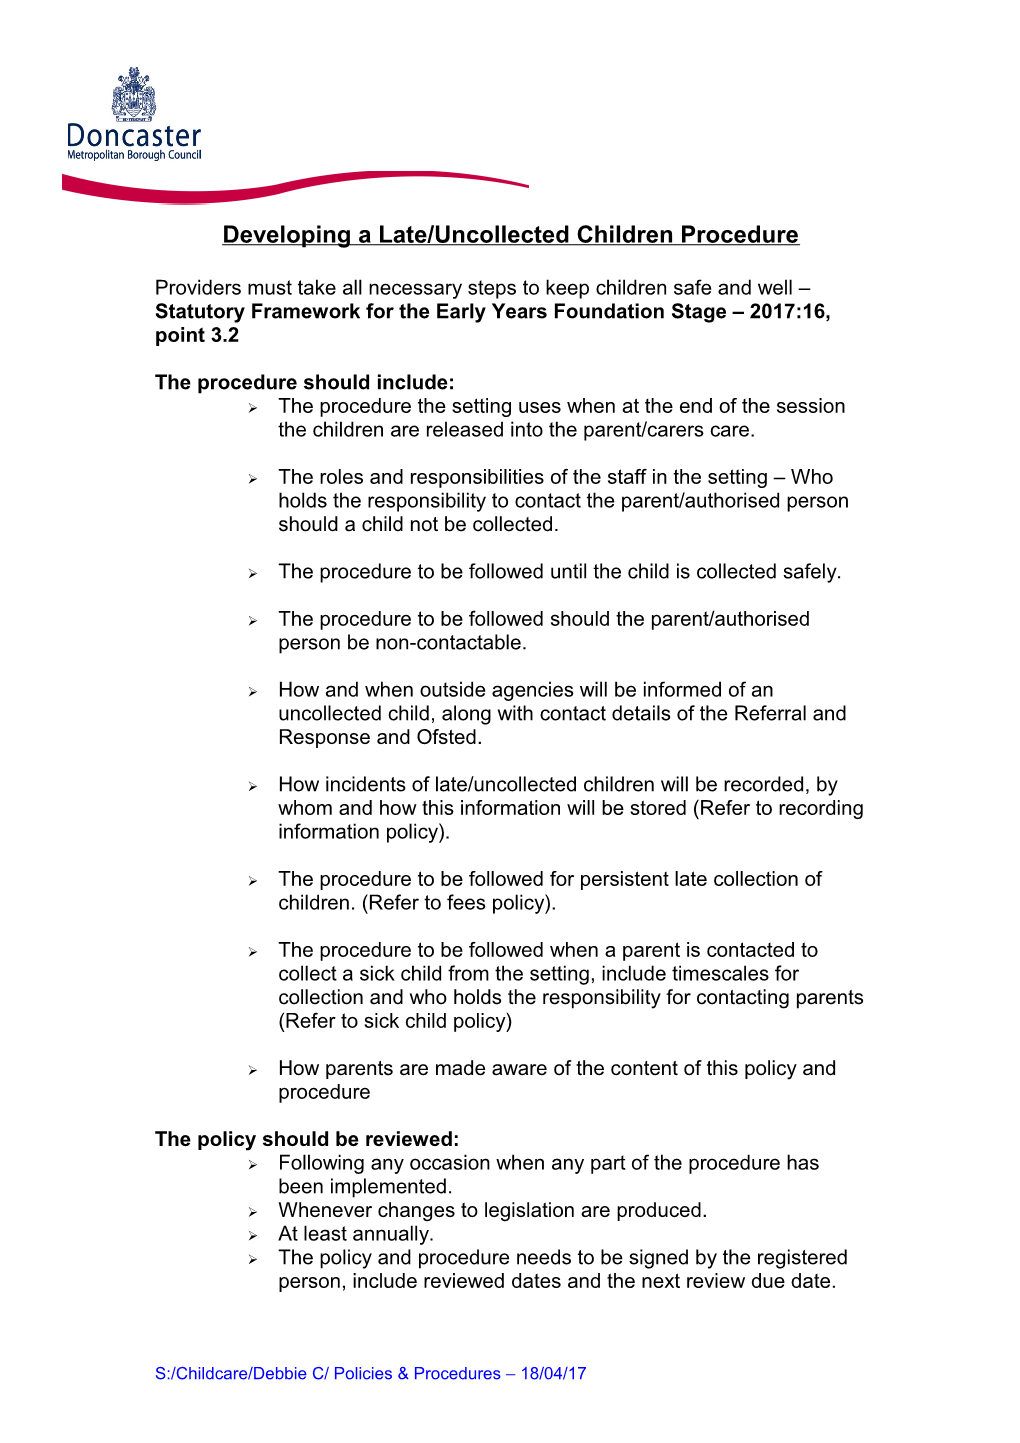 Developing a Late/Uncollected Children Procedure